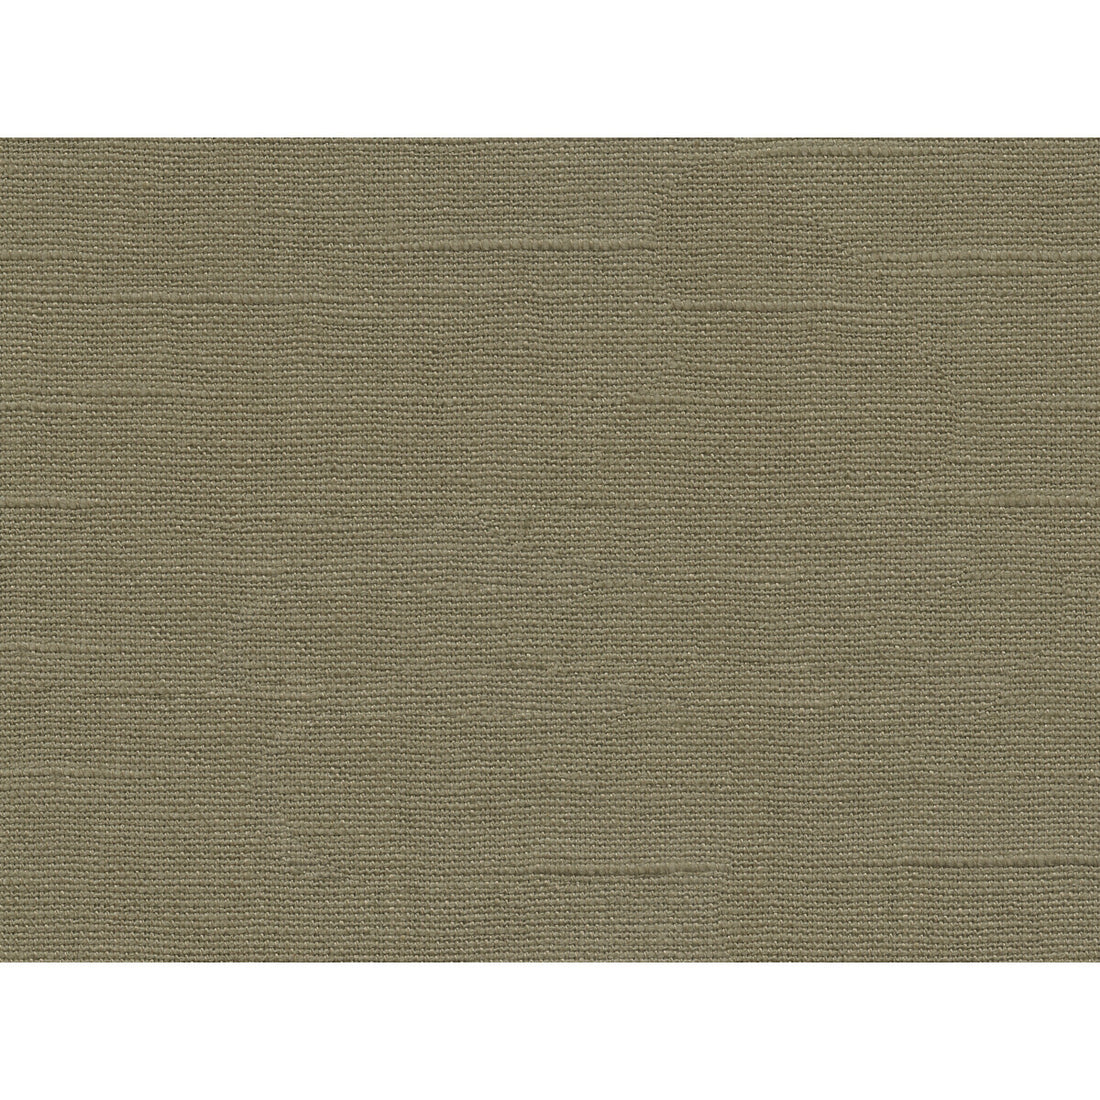 Hixson Linen fabric in bark color - pattern 2018115.6.0 - by Lee Jofa in the Performance Kravetarmor collection